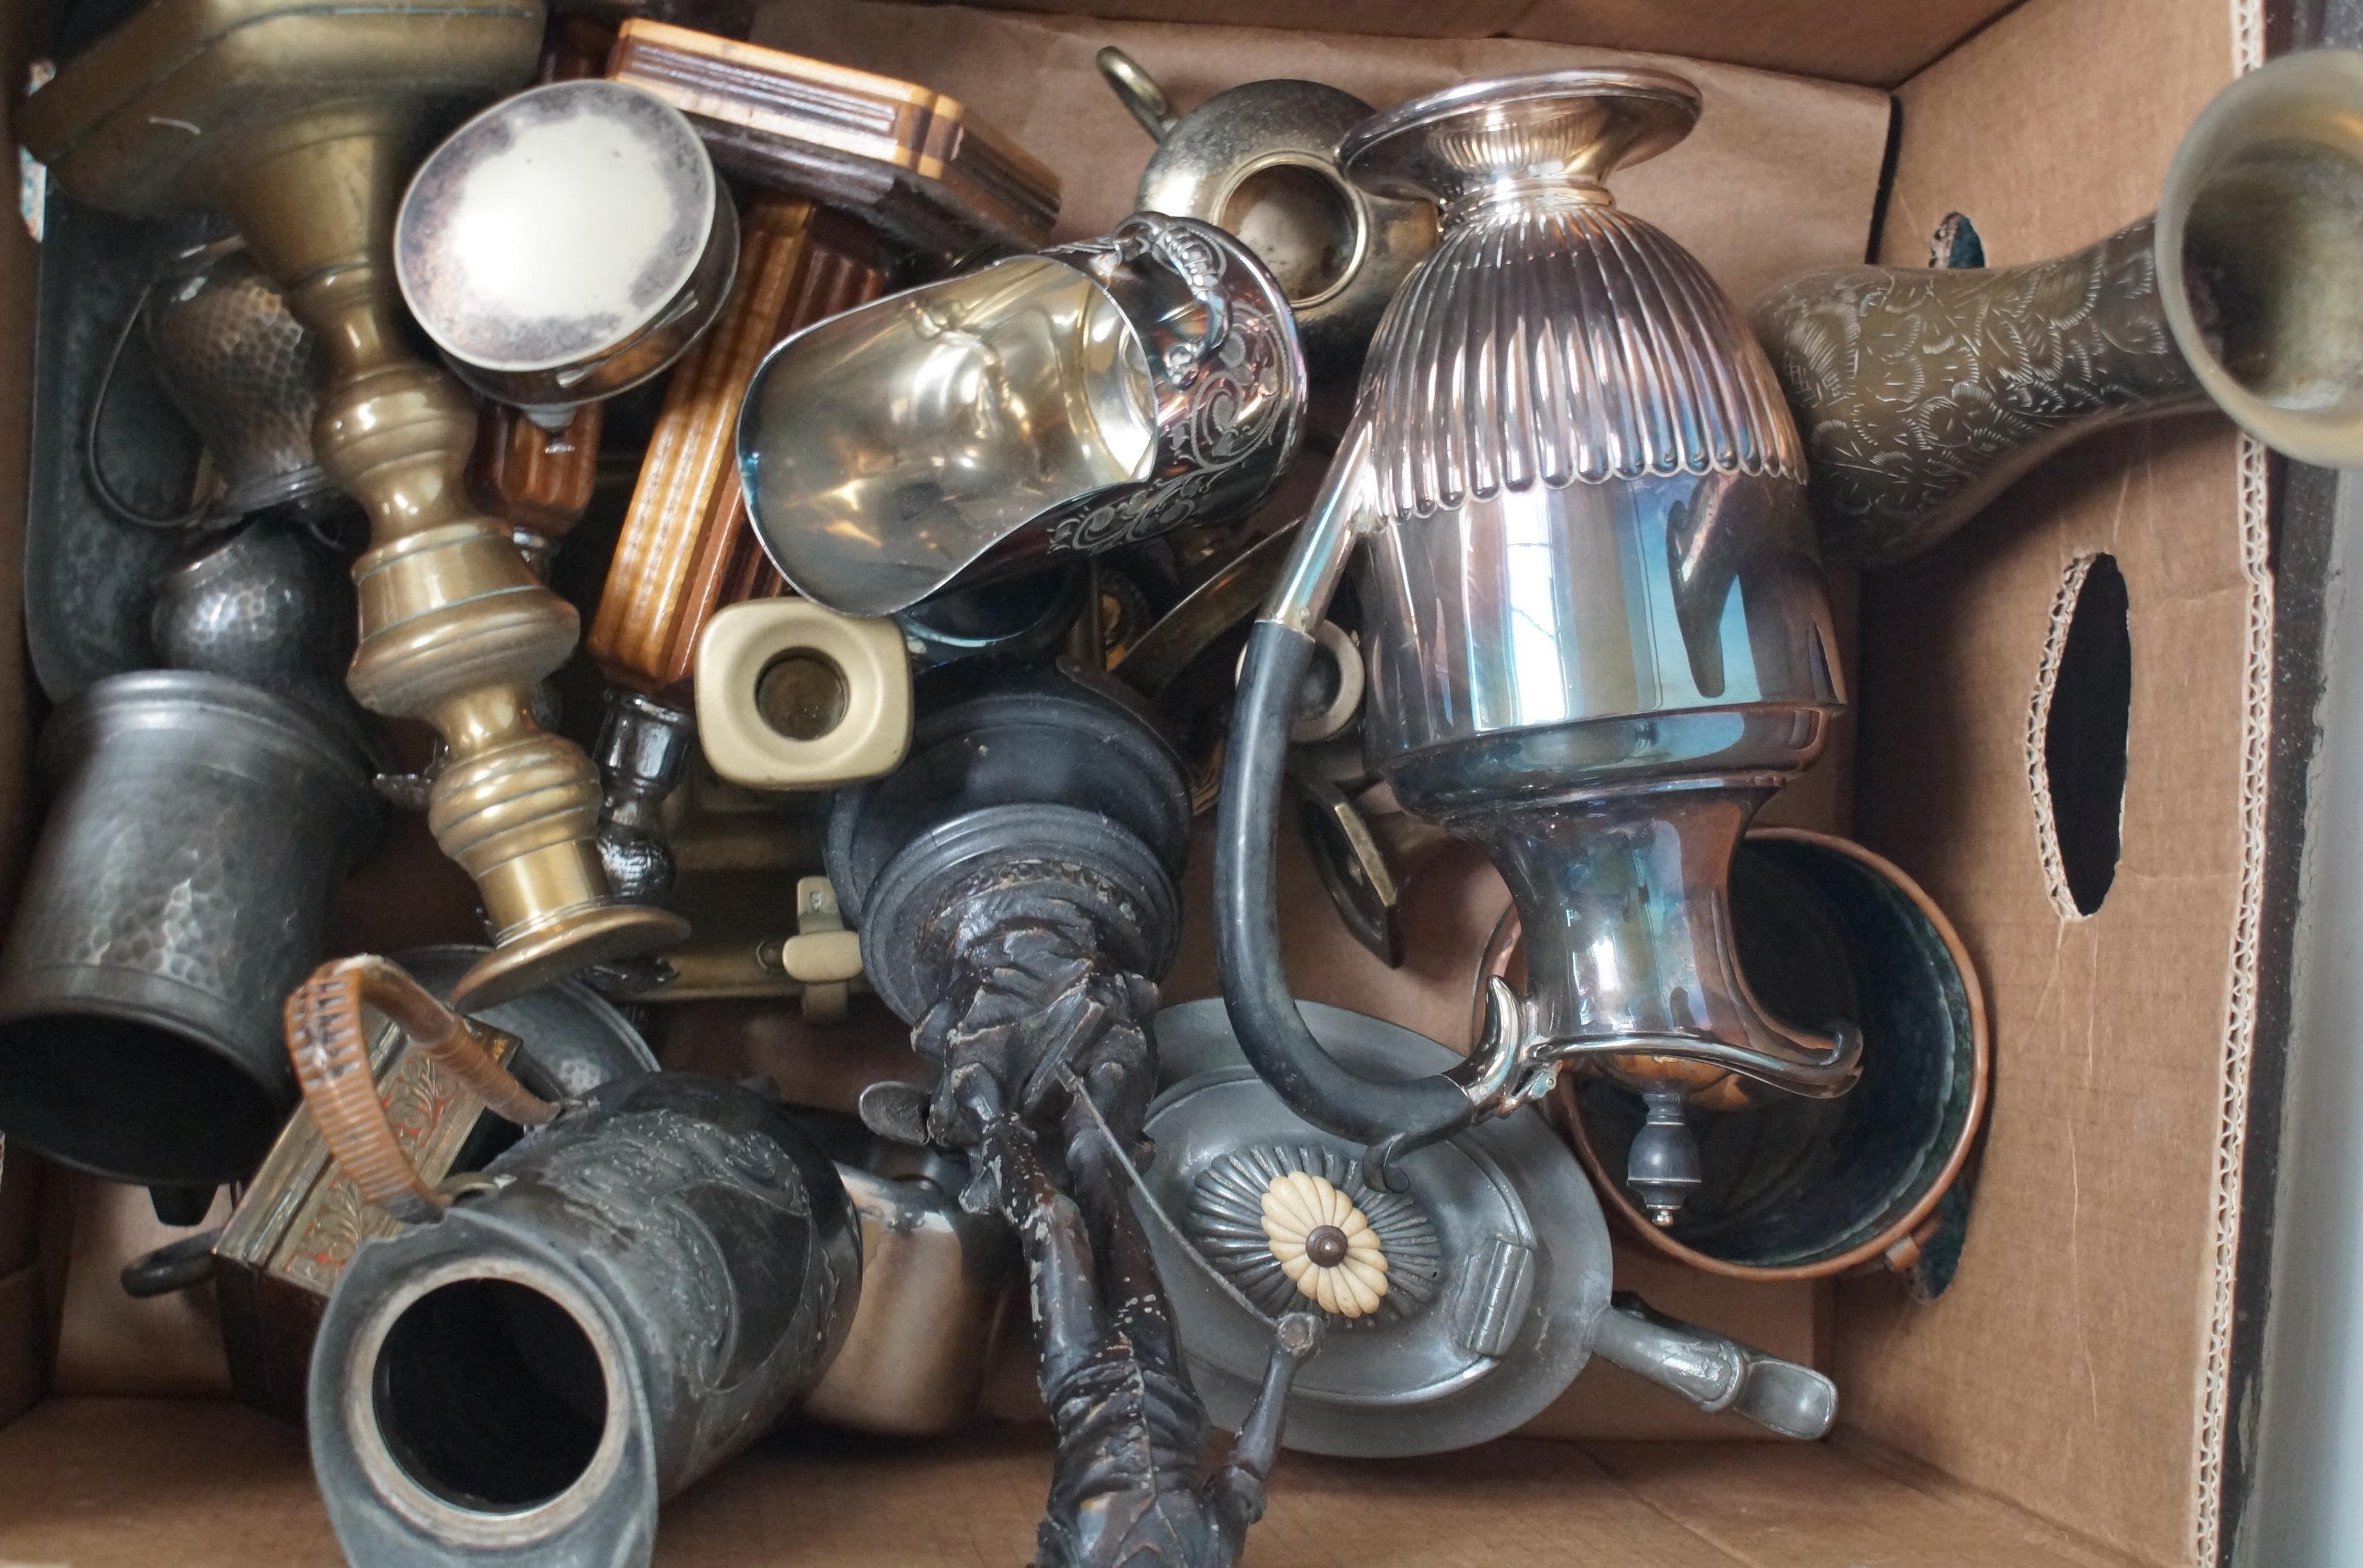 Box of unsorted metal ware